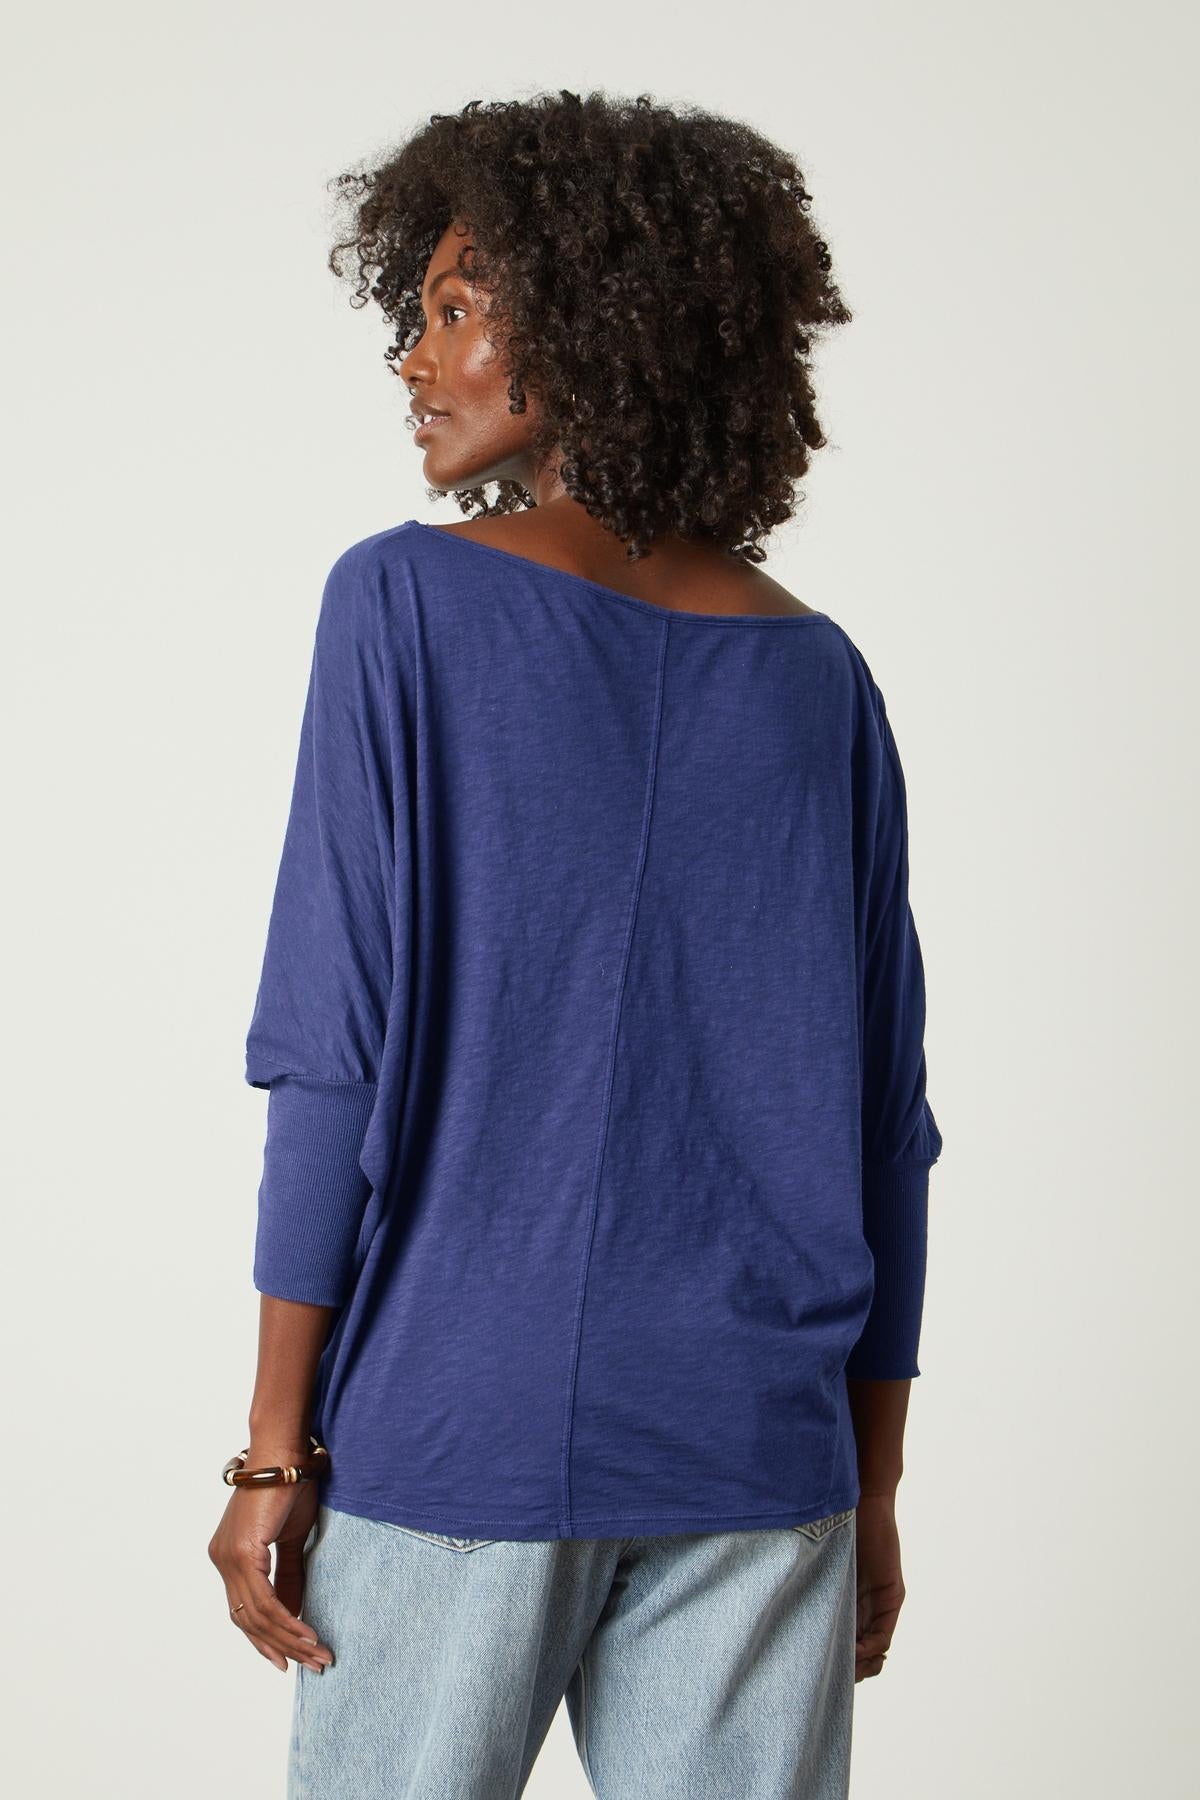   The back view of a woman wearing Velvet by Graham & Spencer jeans and a blue top. 